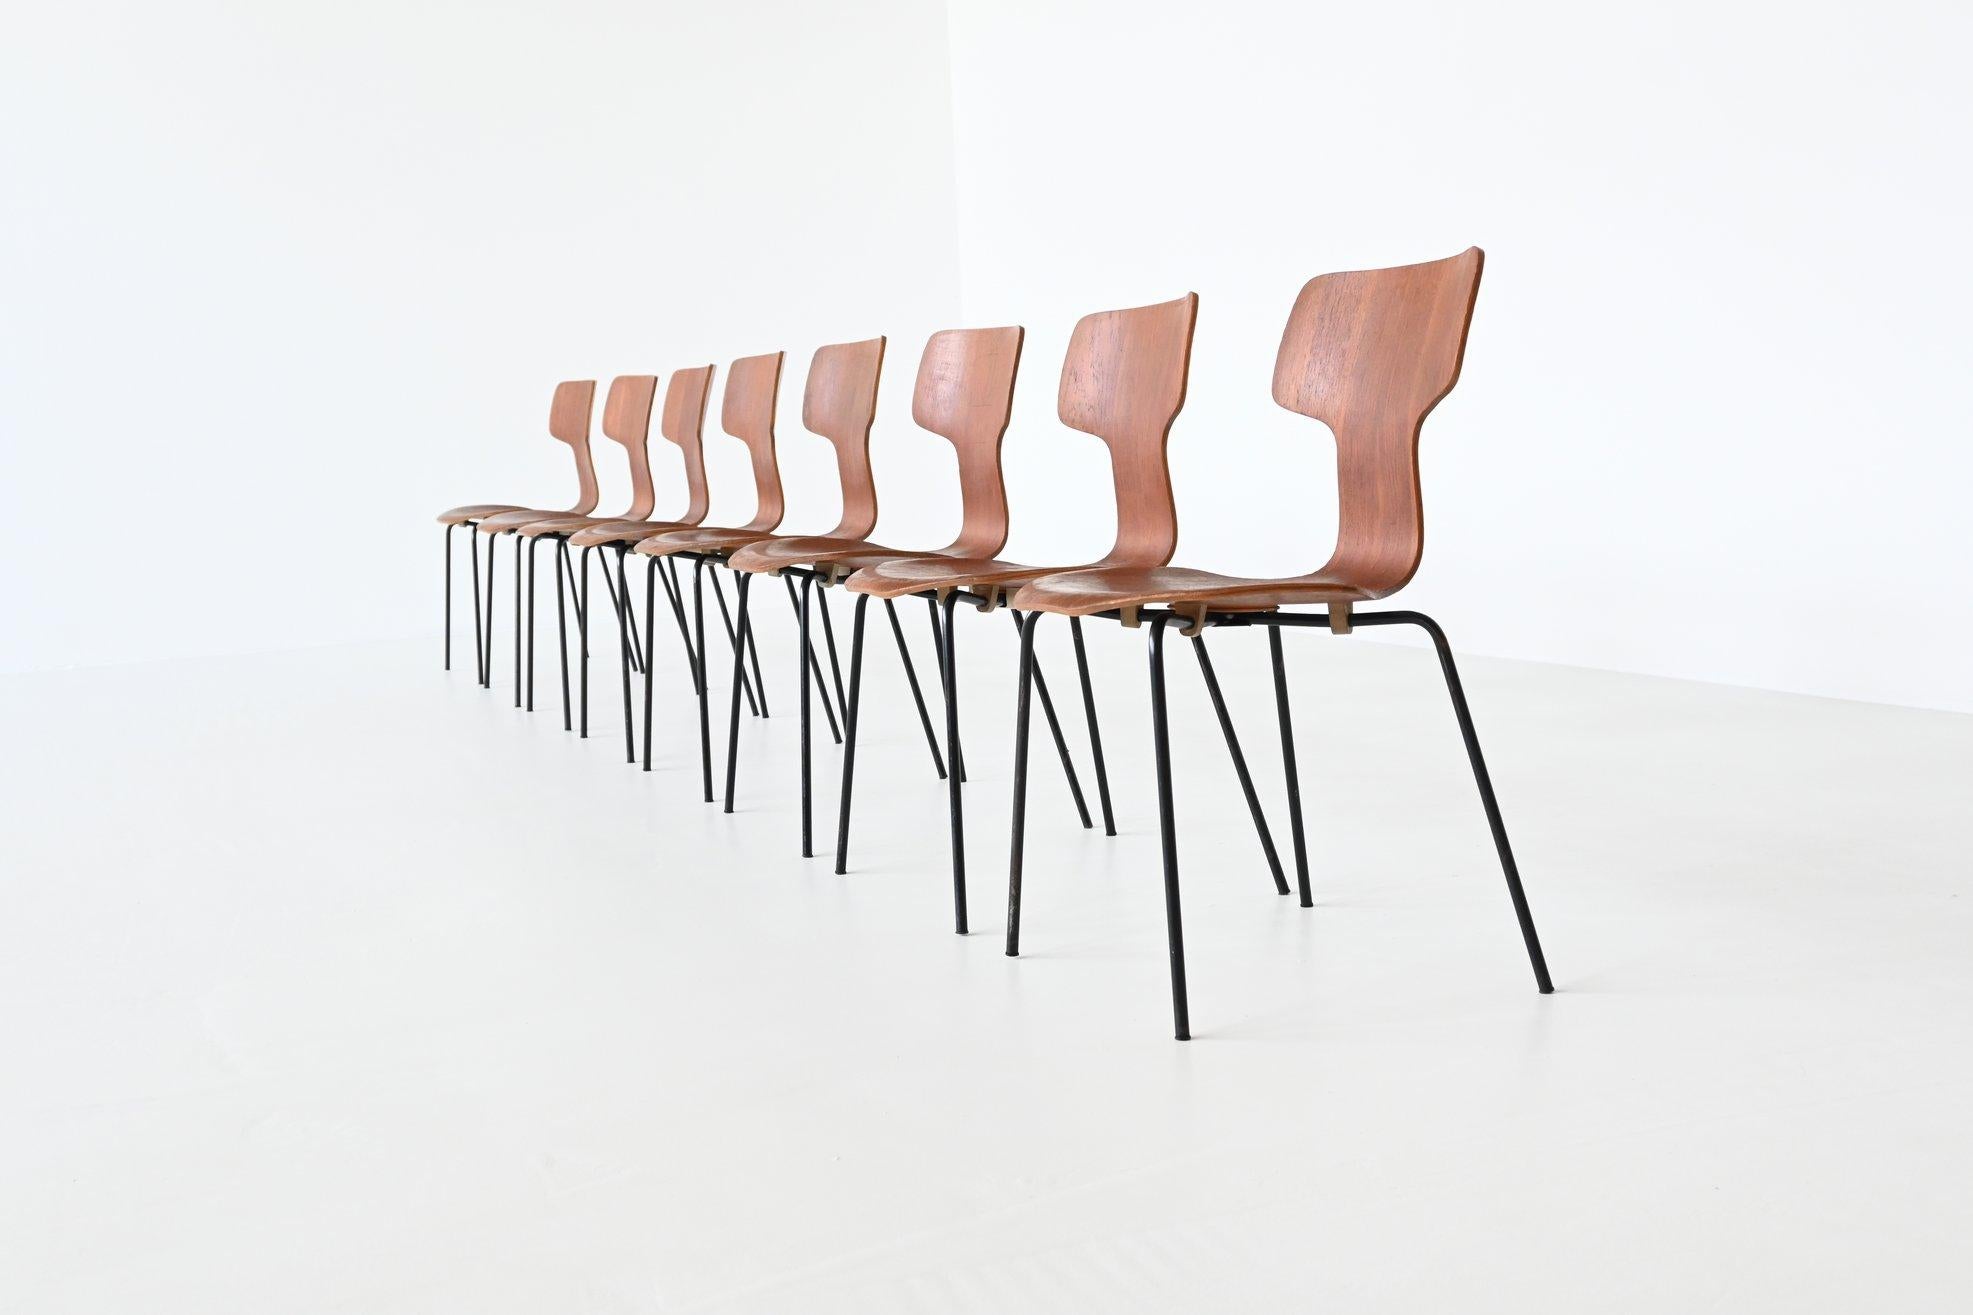 Iconic and beautiful shaped model 3103 “Hammer” dining chairs designed by Arne Jacobsen and manufactured by Fritz Hansen, Denmark 1969. These well-crafted chairs are made of moulded plywood and finished with nicely grained teak veneer. They have